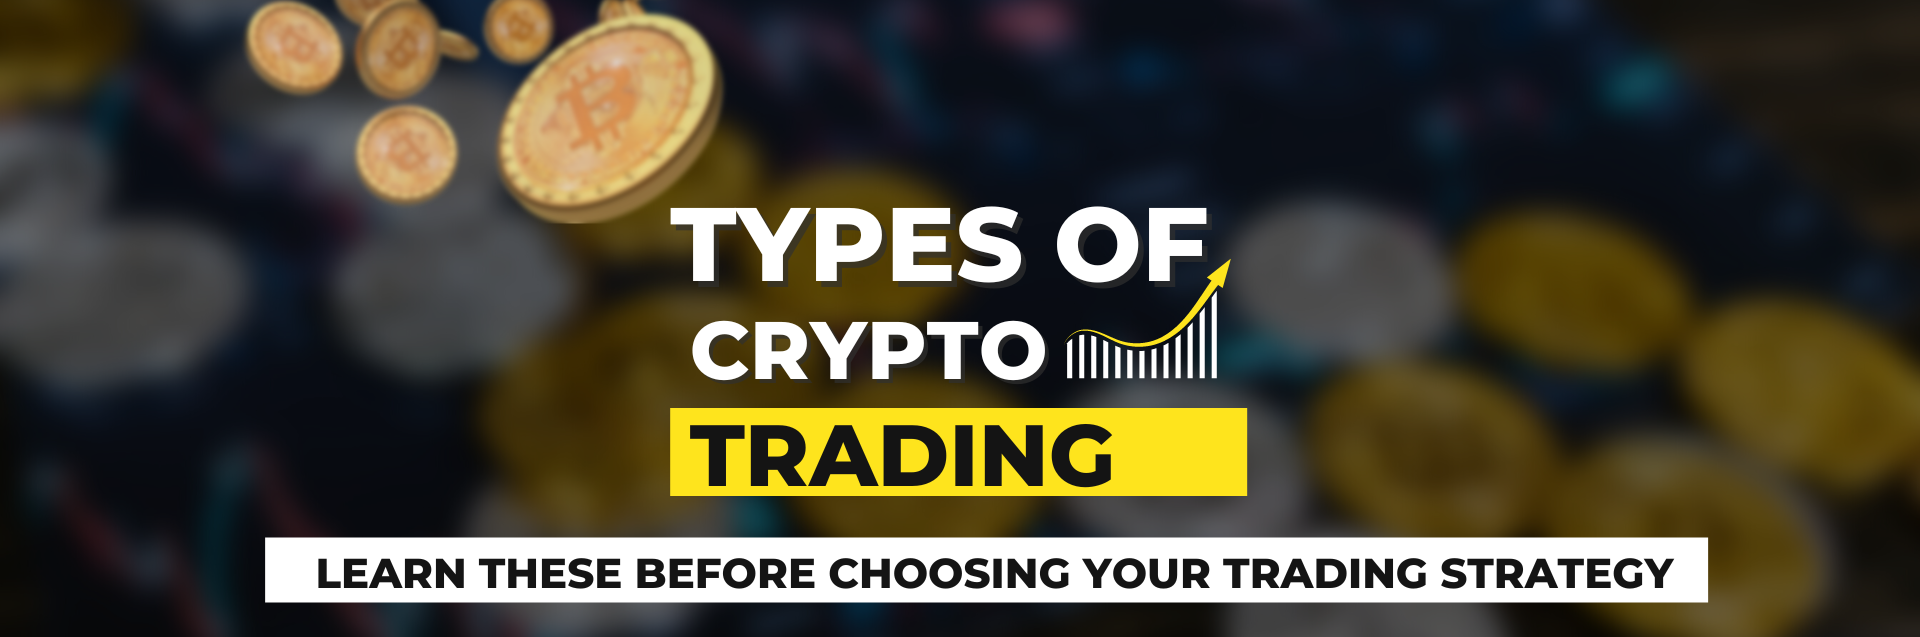 Types of Crypto Trading. Learn these before choosing your trading strategy